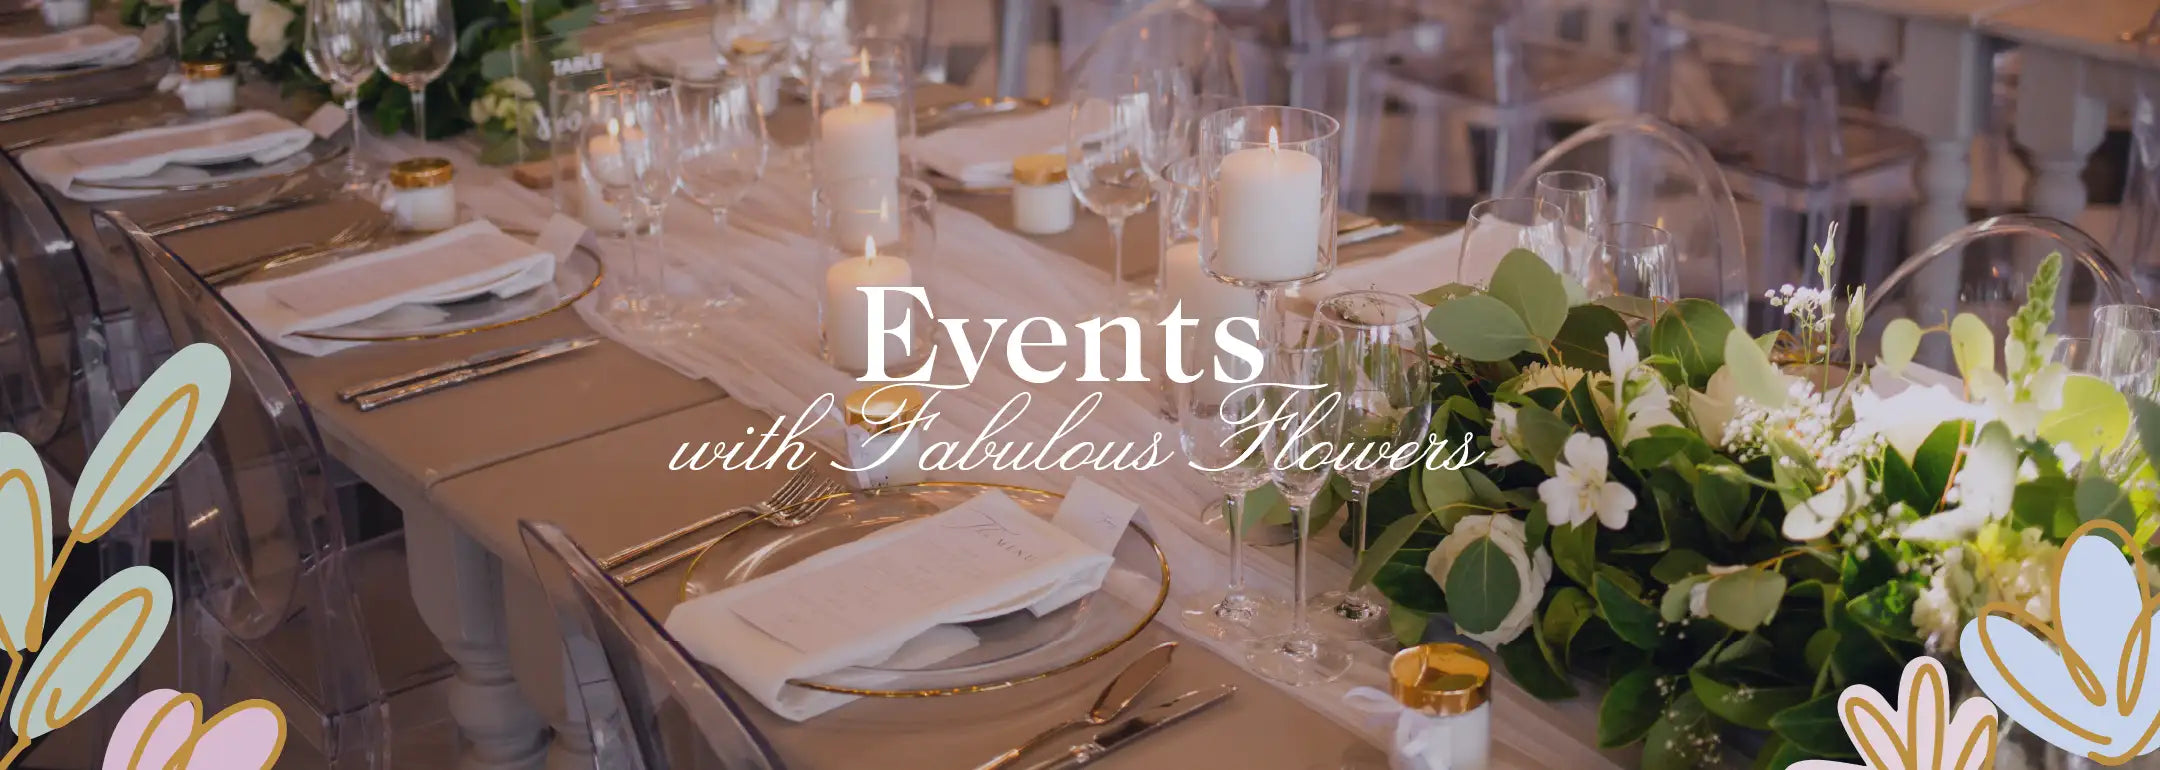 Elegant event table setting with floral centrepieces, candles, and glassware, creating a sophisticated atmosphere for special occasions. Fabulous Flowers and Gifts.